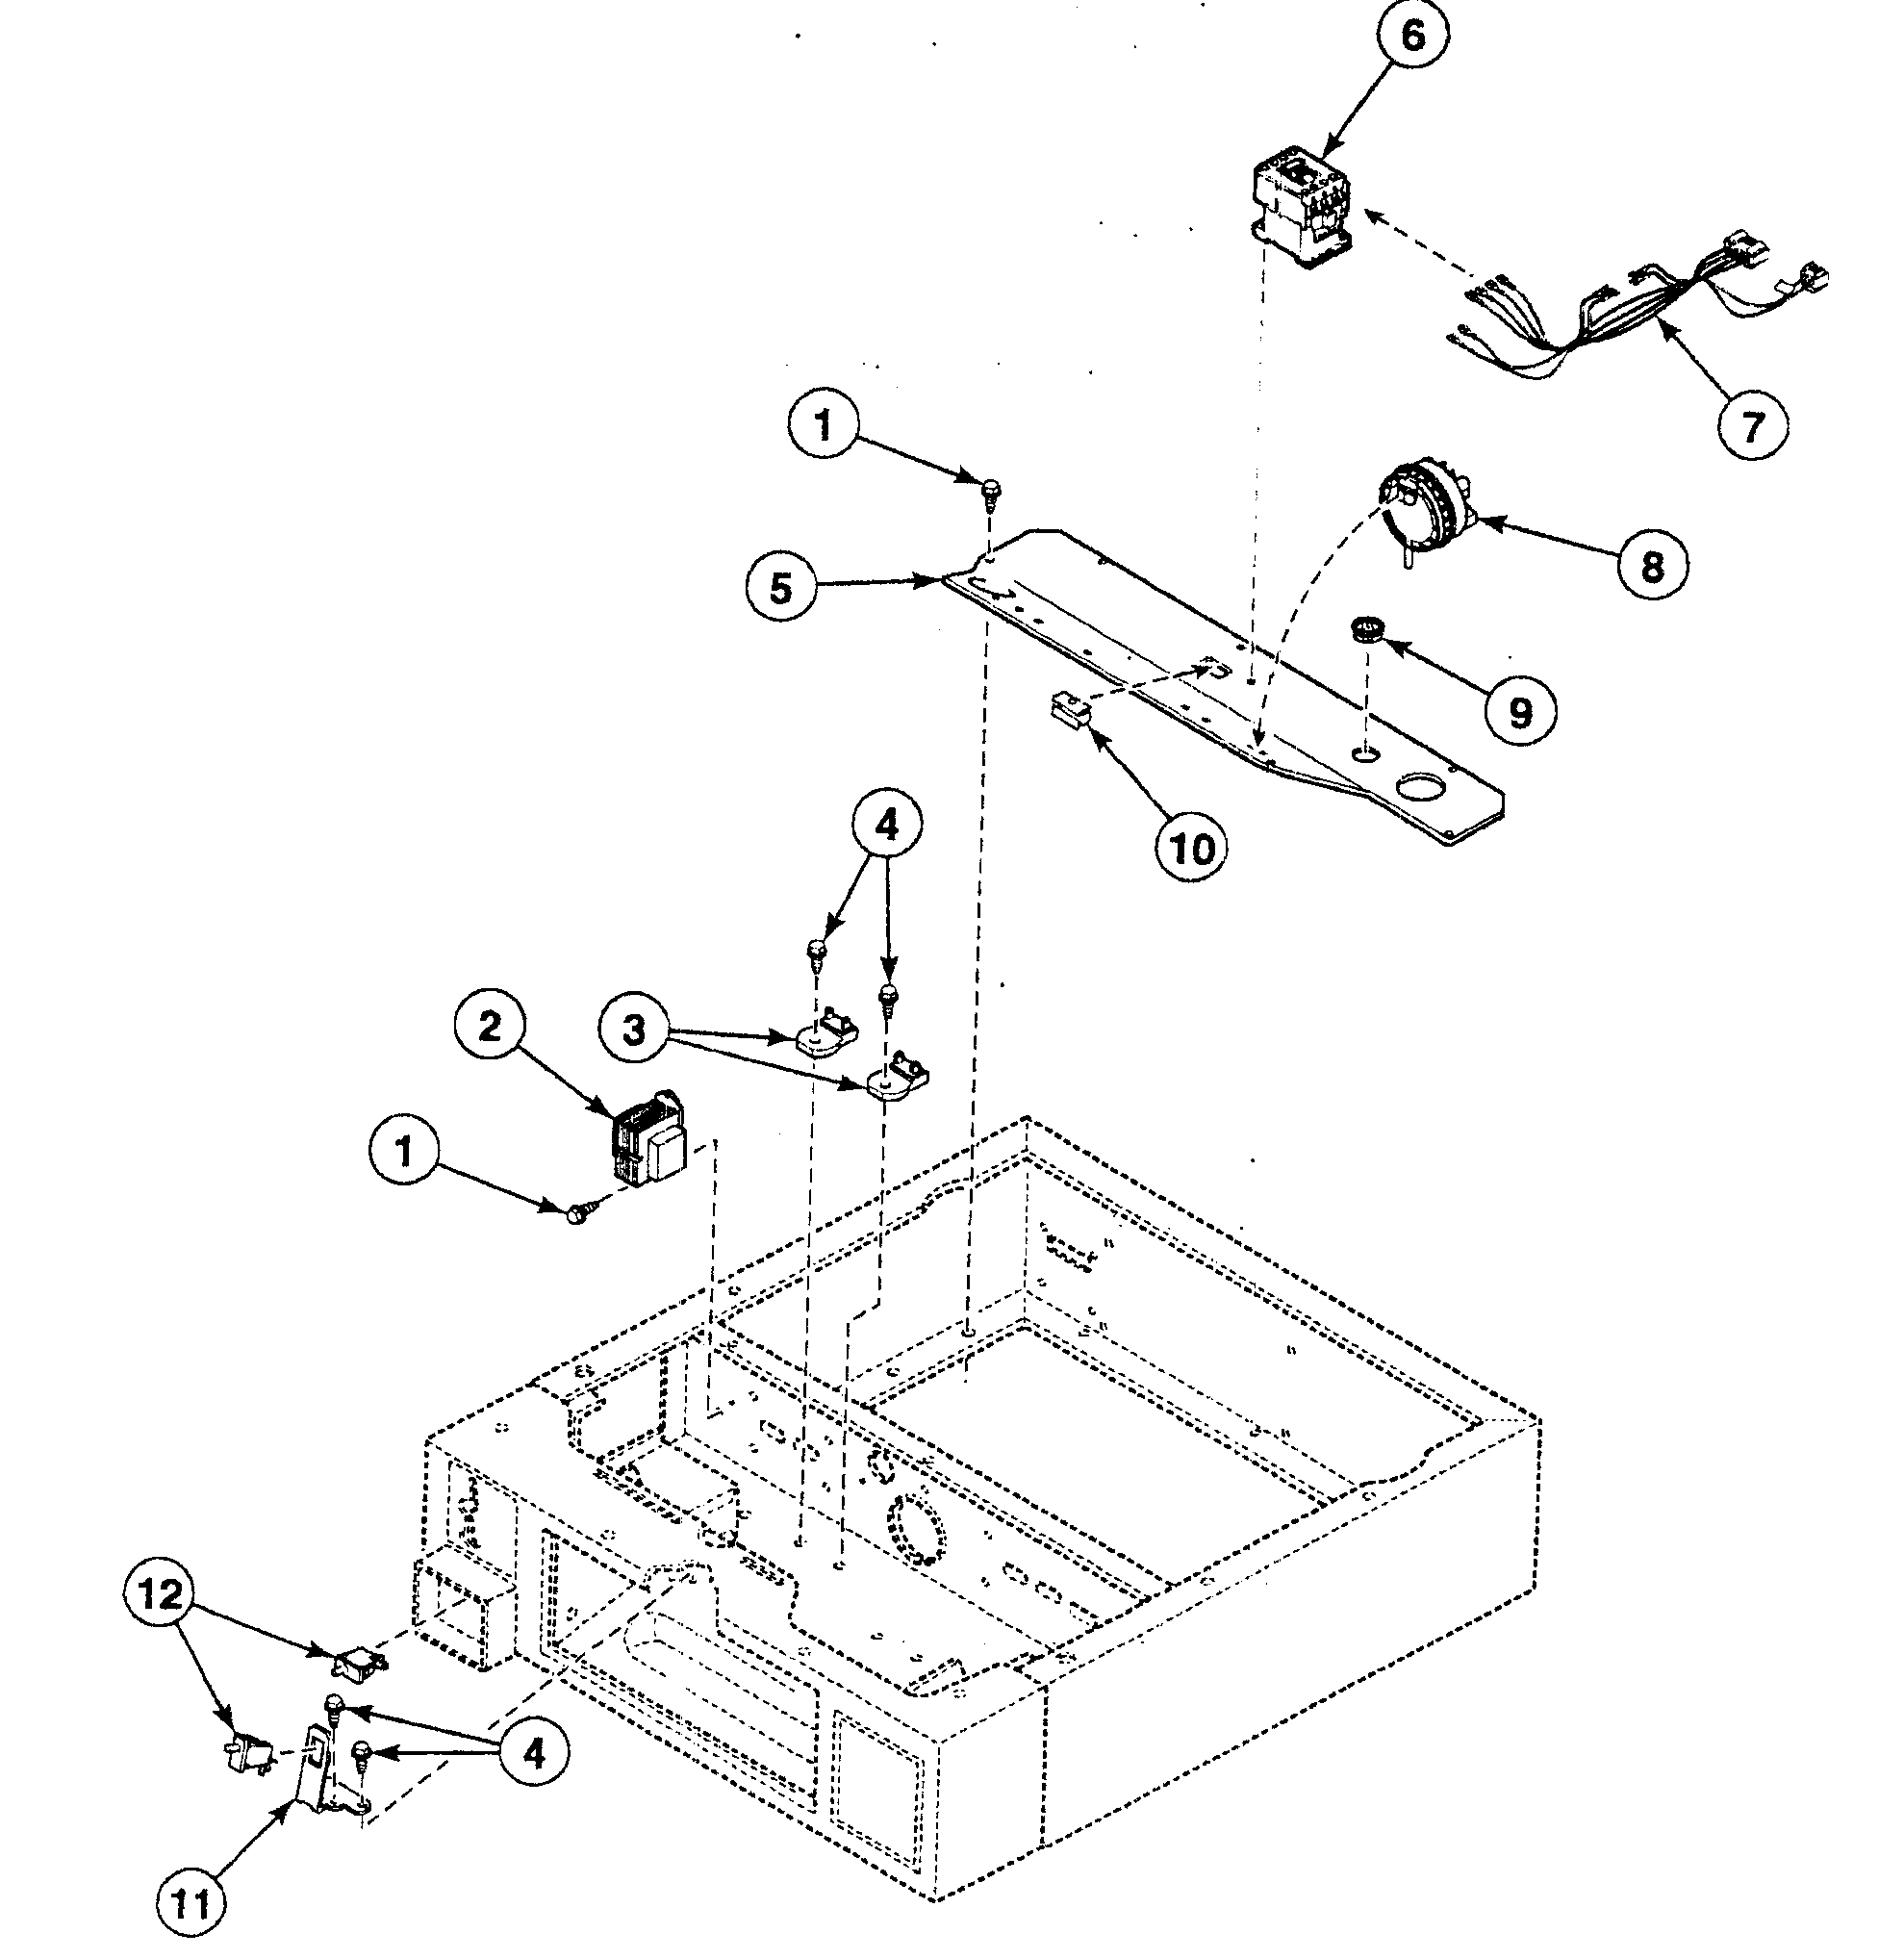 Speed Queen Commercial Washer Parts Diagram